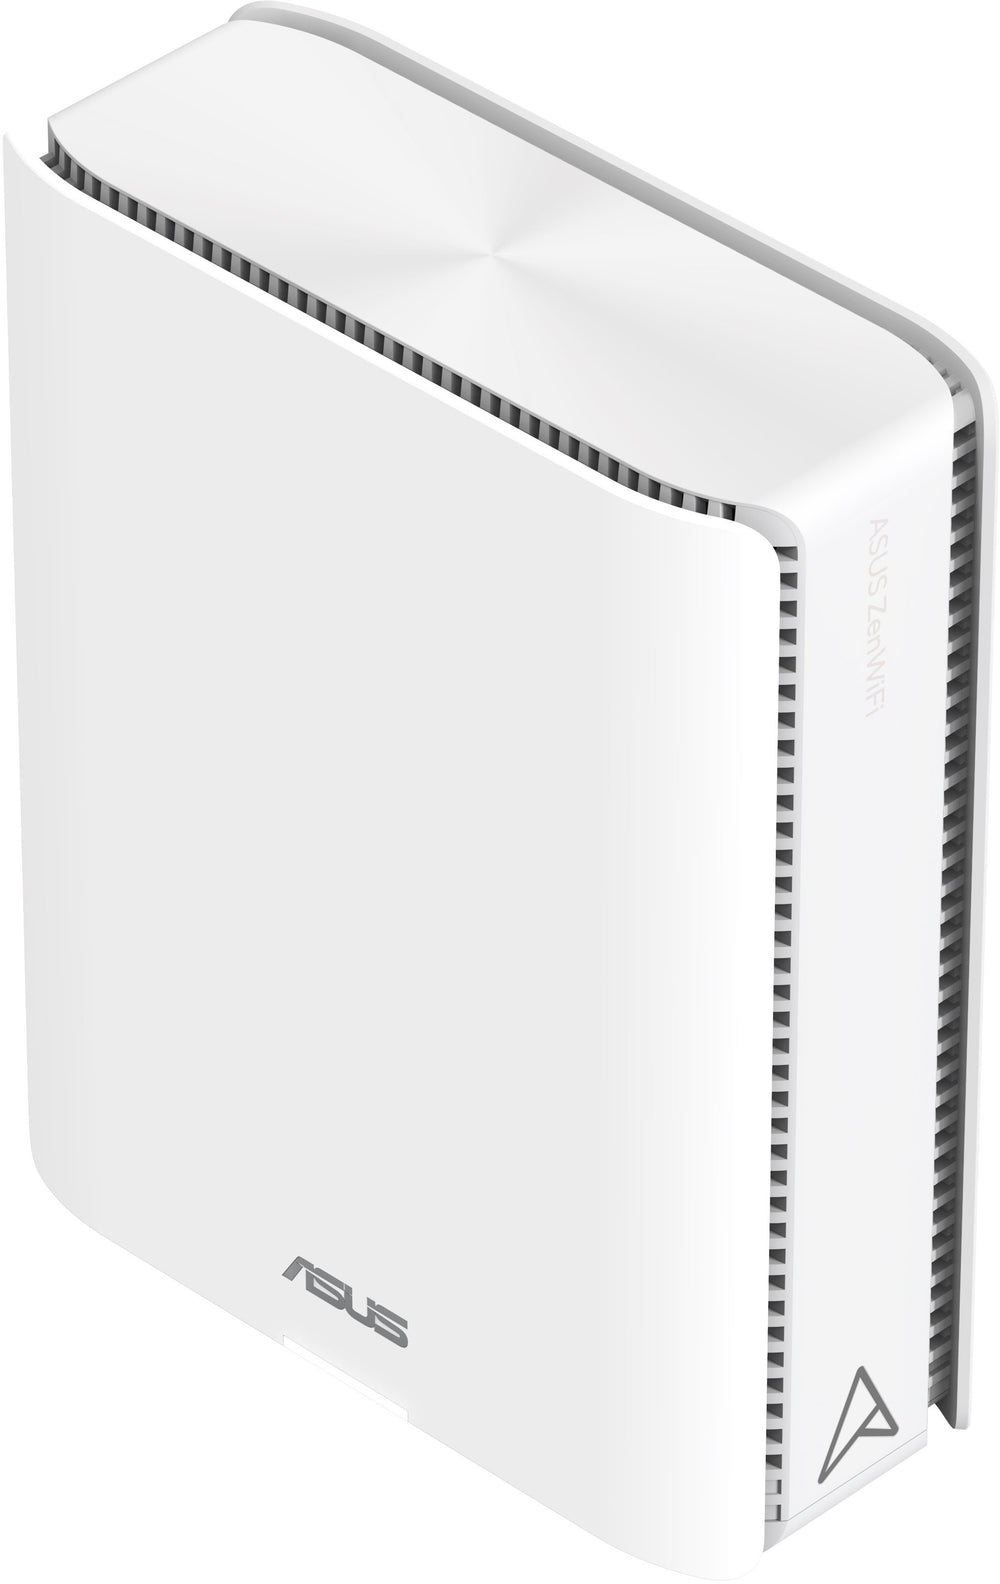 ASUS - ZenWiFi BE30000 WiFi 7 Quad-band Mesh Router (3-Pack) - White_2